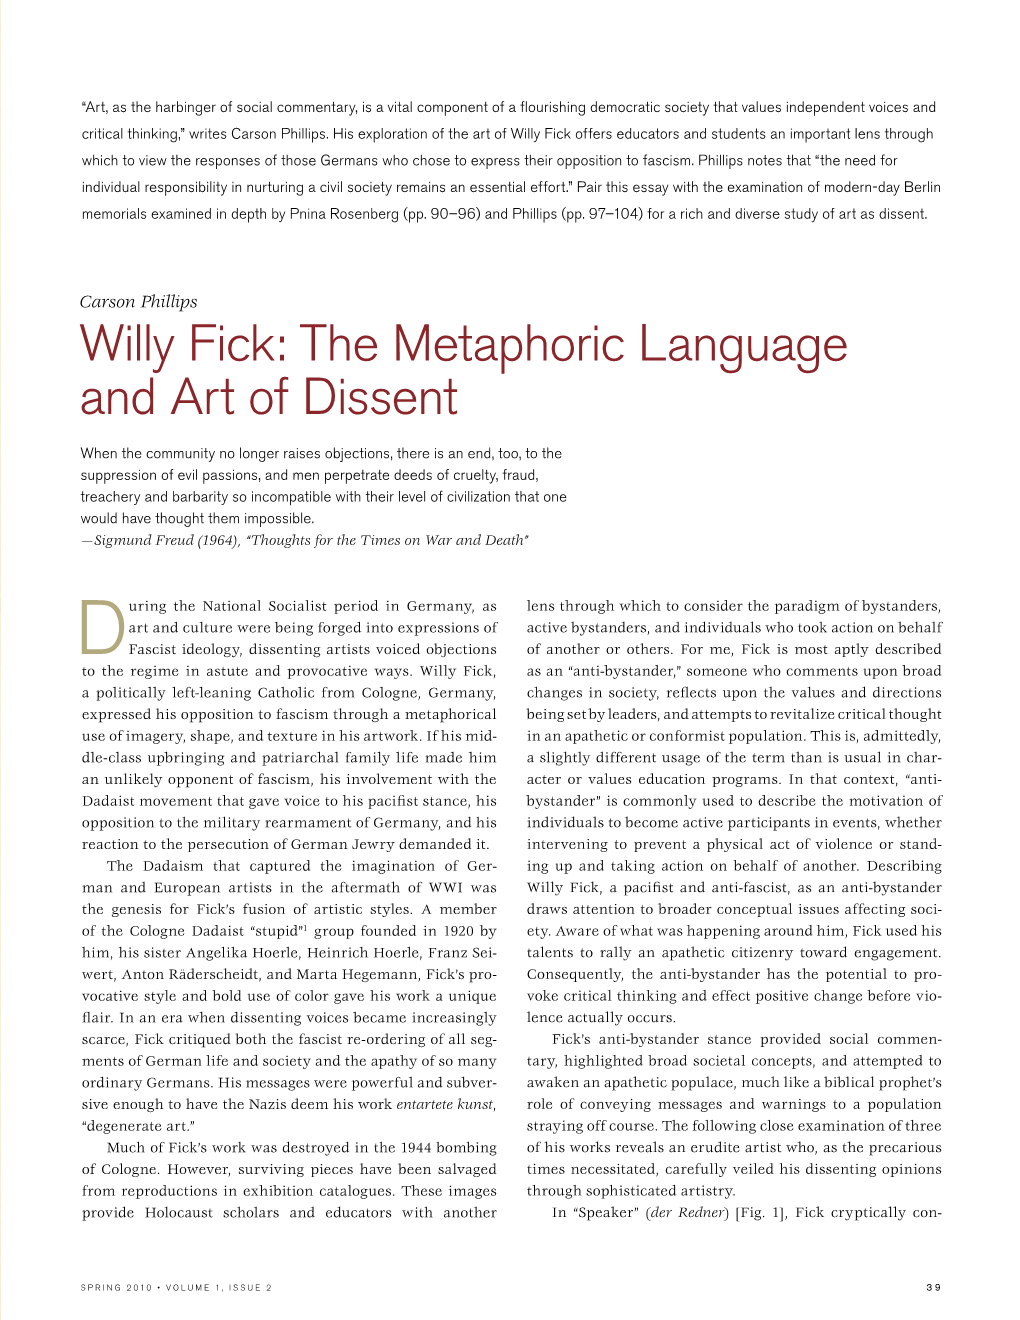 Willy Fick: the Metaphoric Language and Art of Dissent